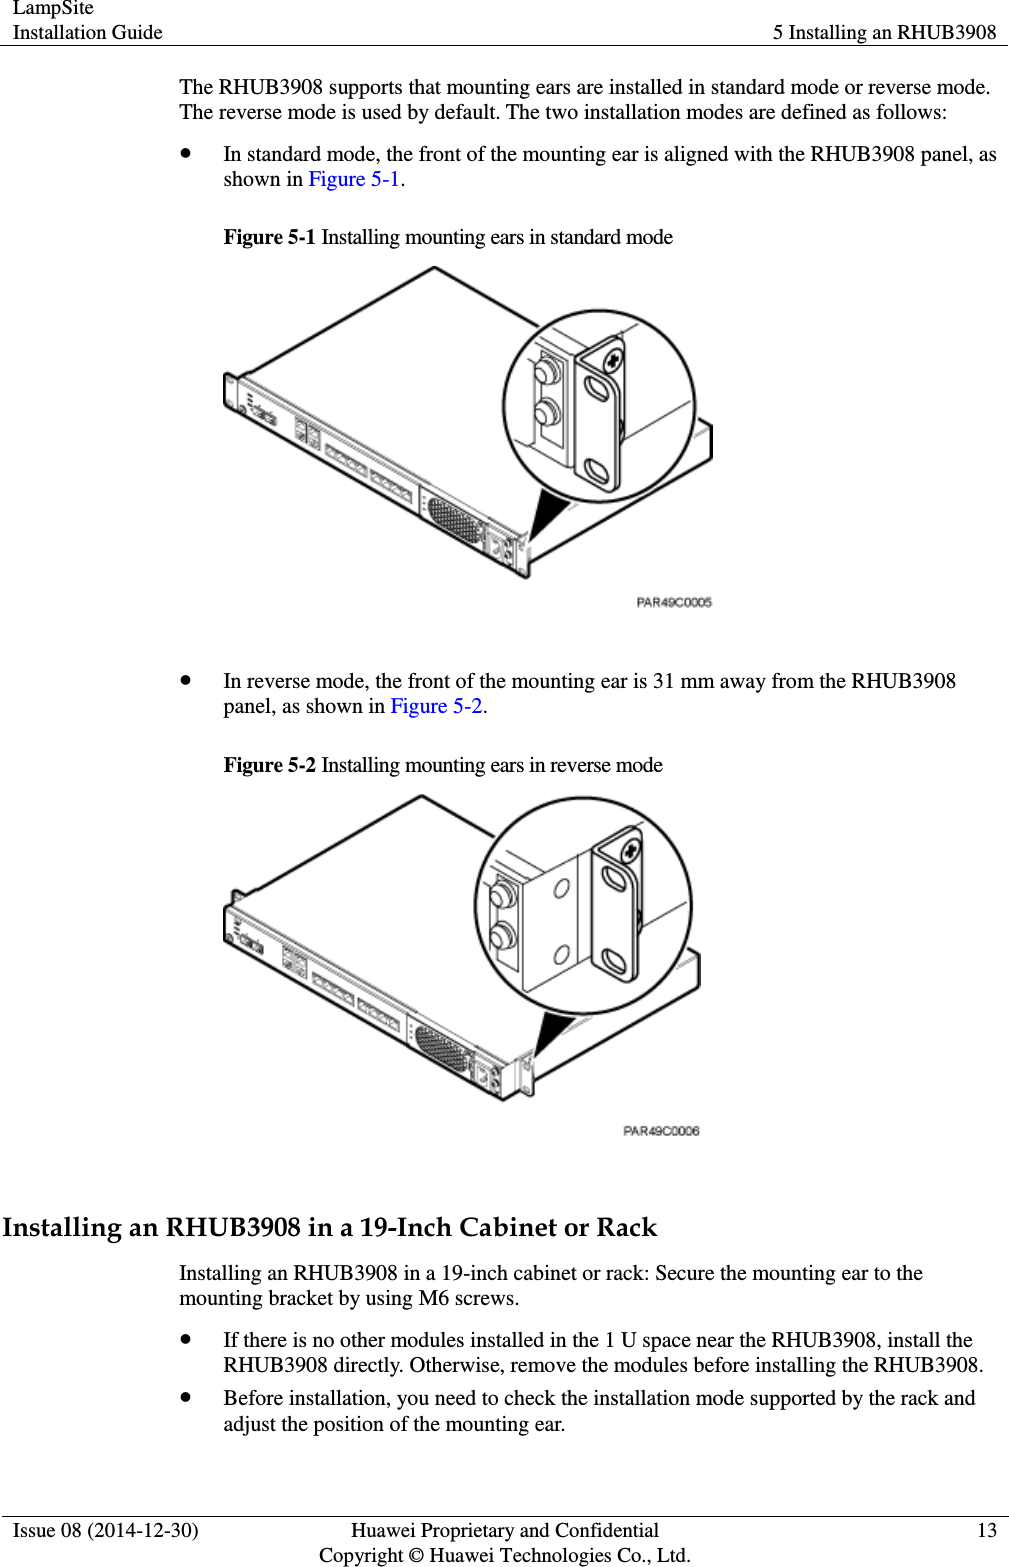 LampSite Installation Guide 5 Installing an RHUB3908  Issue 08 (2014-12-30) Huawei Proprietary and Confidential                                     Copyright © Huawei Technologies Co., Ltd. 13  The RHUB3908 supports that mounting ears are installed in standard mode or reverse mode. The reverse mode is used by default. The two installation modes are defined as follows:    In standard mode, the front of the mounting ear is aligned with the RHUB3908 panel, as shown in Figure 5-1.   Figure 5-1 Installing mounting ears in standard mode    In reverse mode, the front of the mounting ear is 31 mm away from the RHUB3908 panel, as shown in Figure 5-2.   Figure 5-2 Installing mounting ears in reverse mode   Installing an RHUB3908 in a 19-Inch Cabinet or Rack Installing an RHUB3908 in a 19-inch cabinet or rack: Secure the mounting ear to the mounting bracket by using M6 screws.    If there is no other modules installed in the 1 U space near the RHUB3908, install the RHUB3908 directly. Otherwise, remove the modules before installing the RHUB3908.    Before installation, you need to check the installation mode supported by the rack and adjust the position of the mounting ear.   